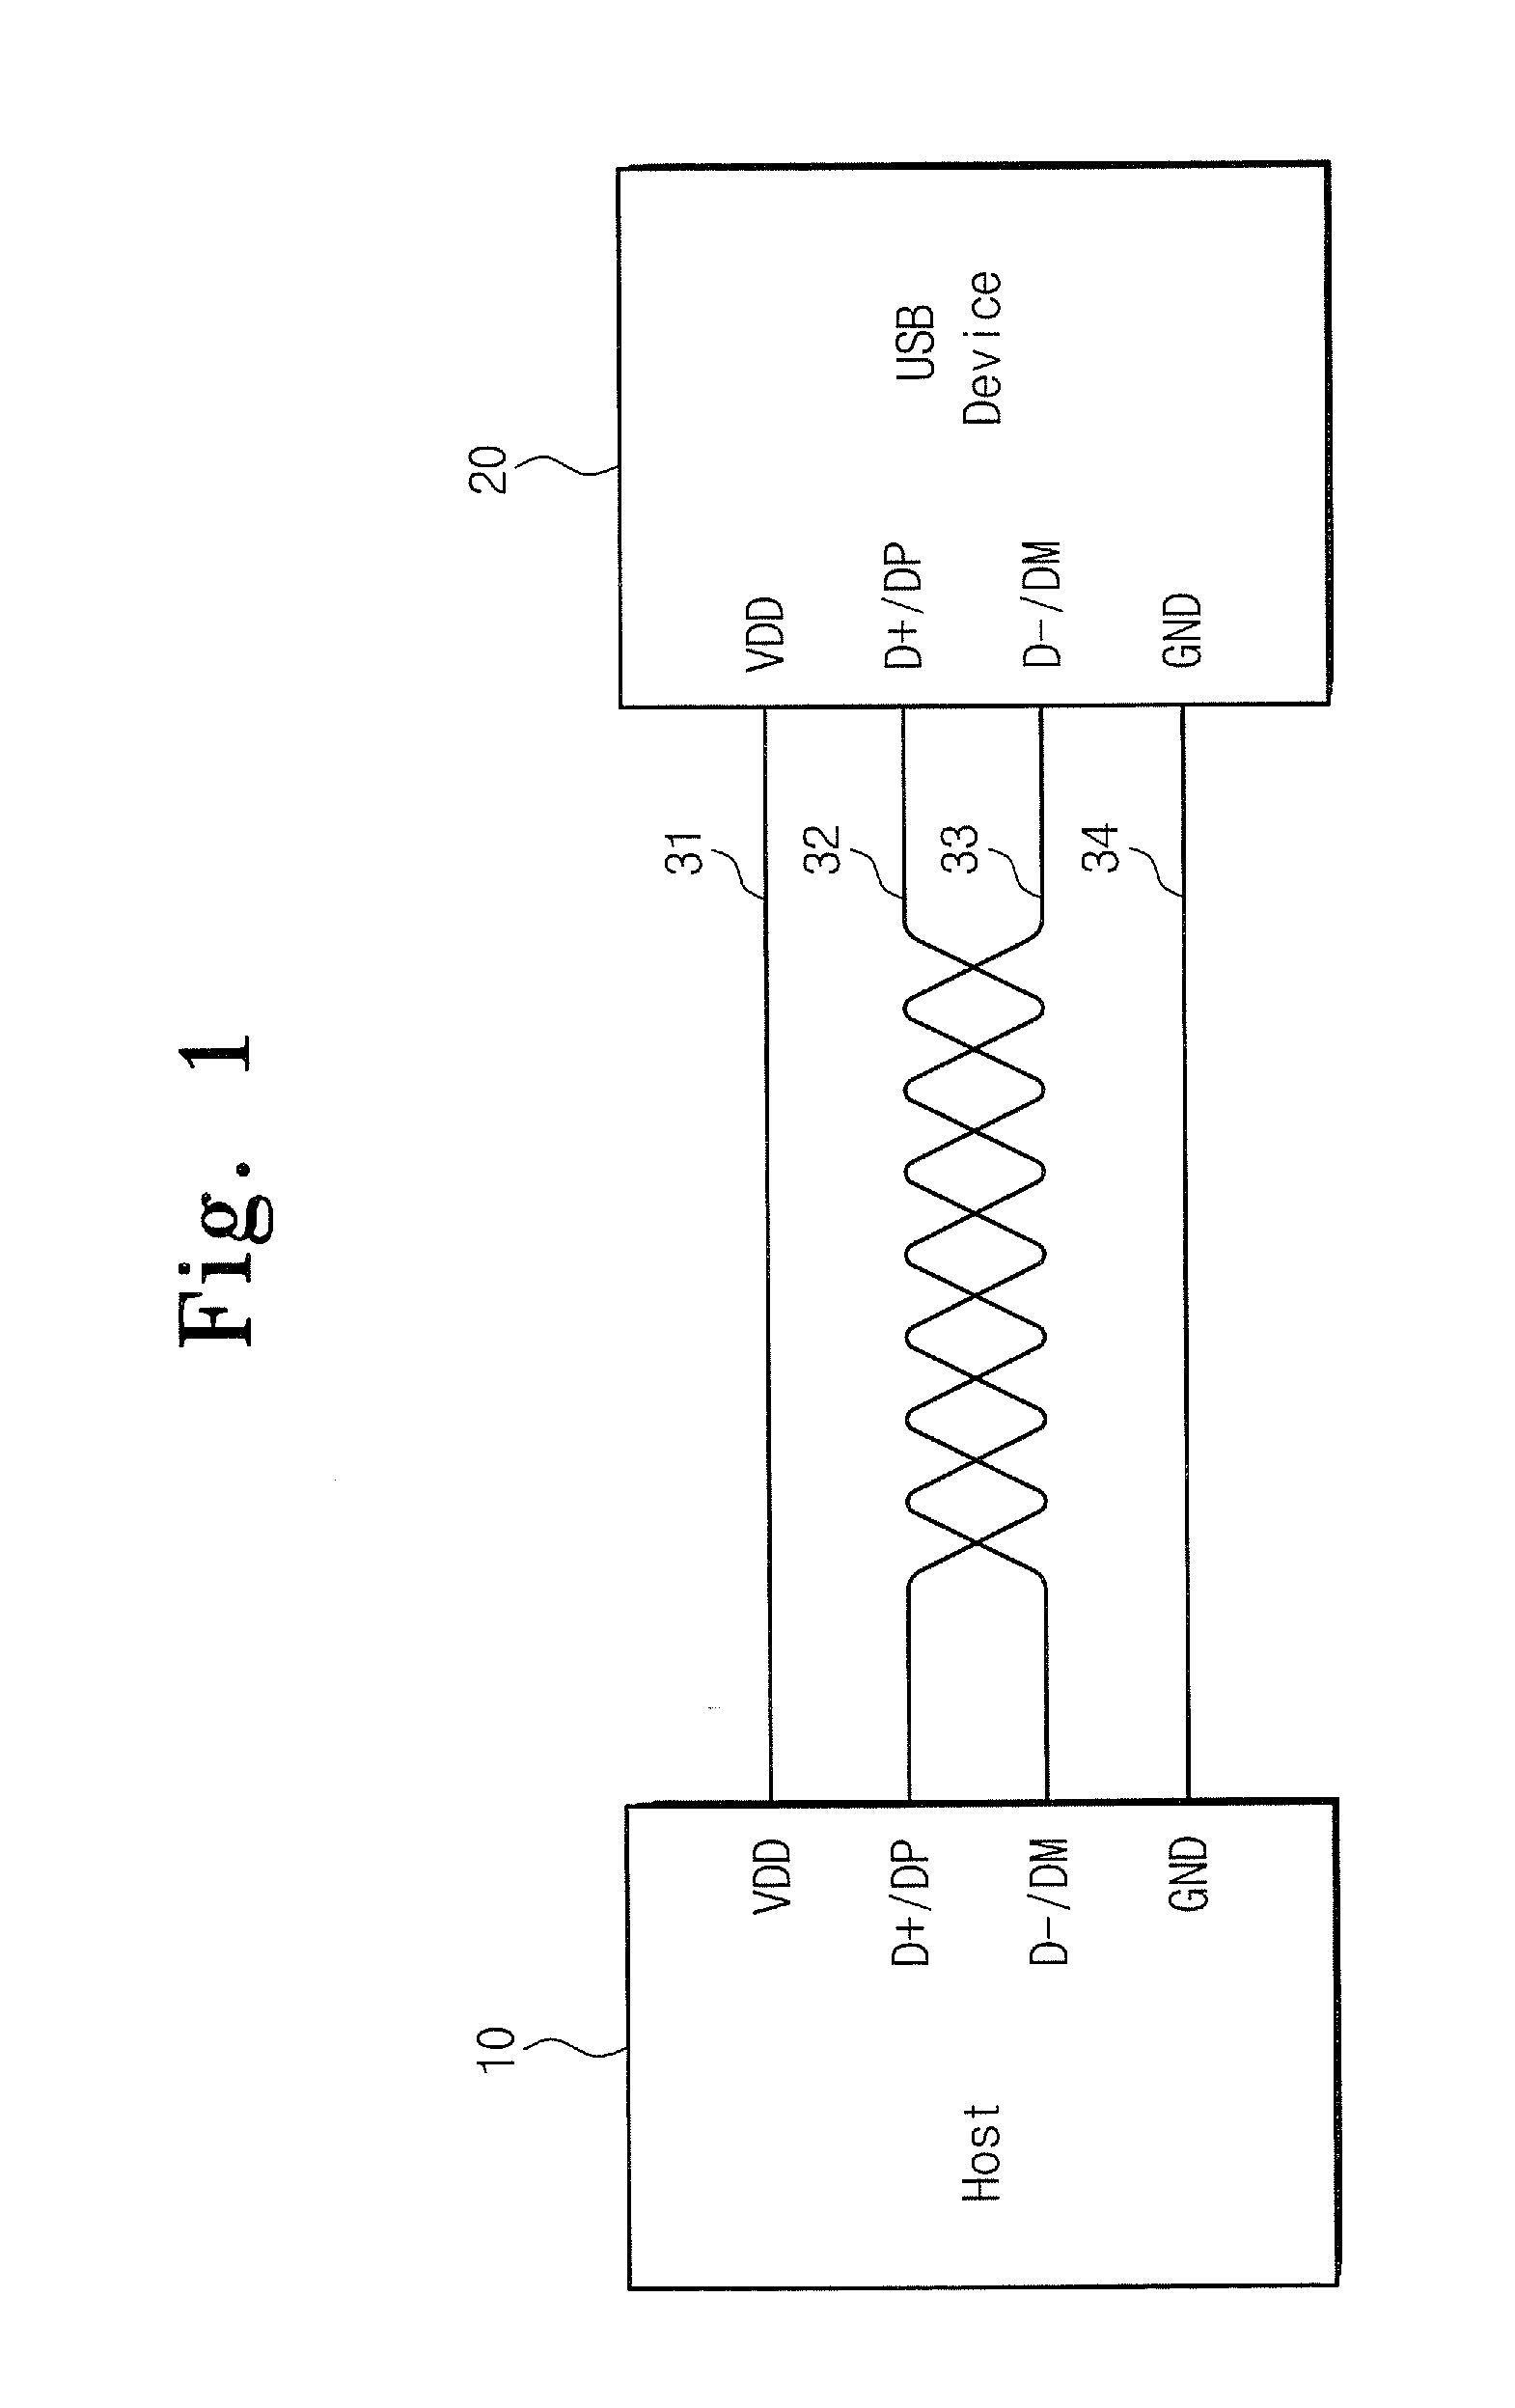 Electronic Device Having USB Interface Capable of Supporting Multiple USB Interface Standards and Methods of Operating Same